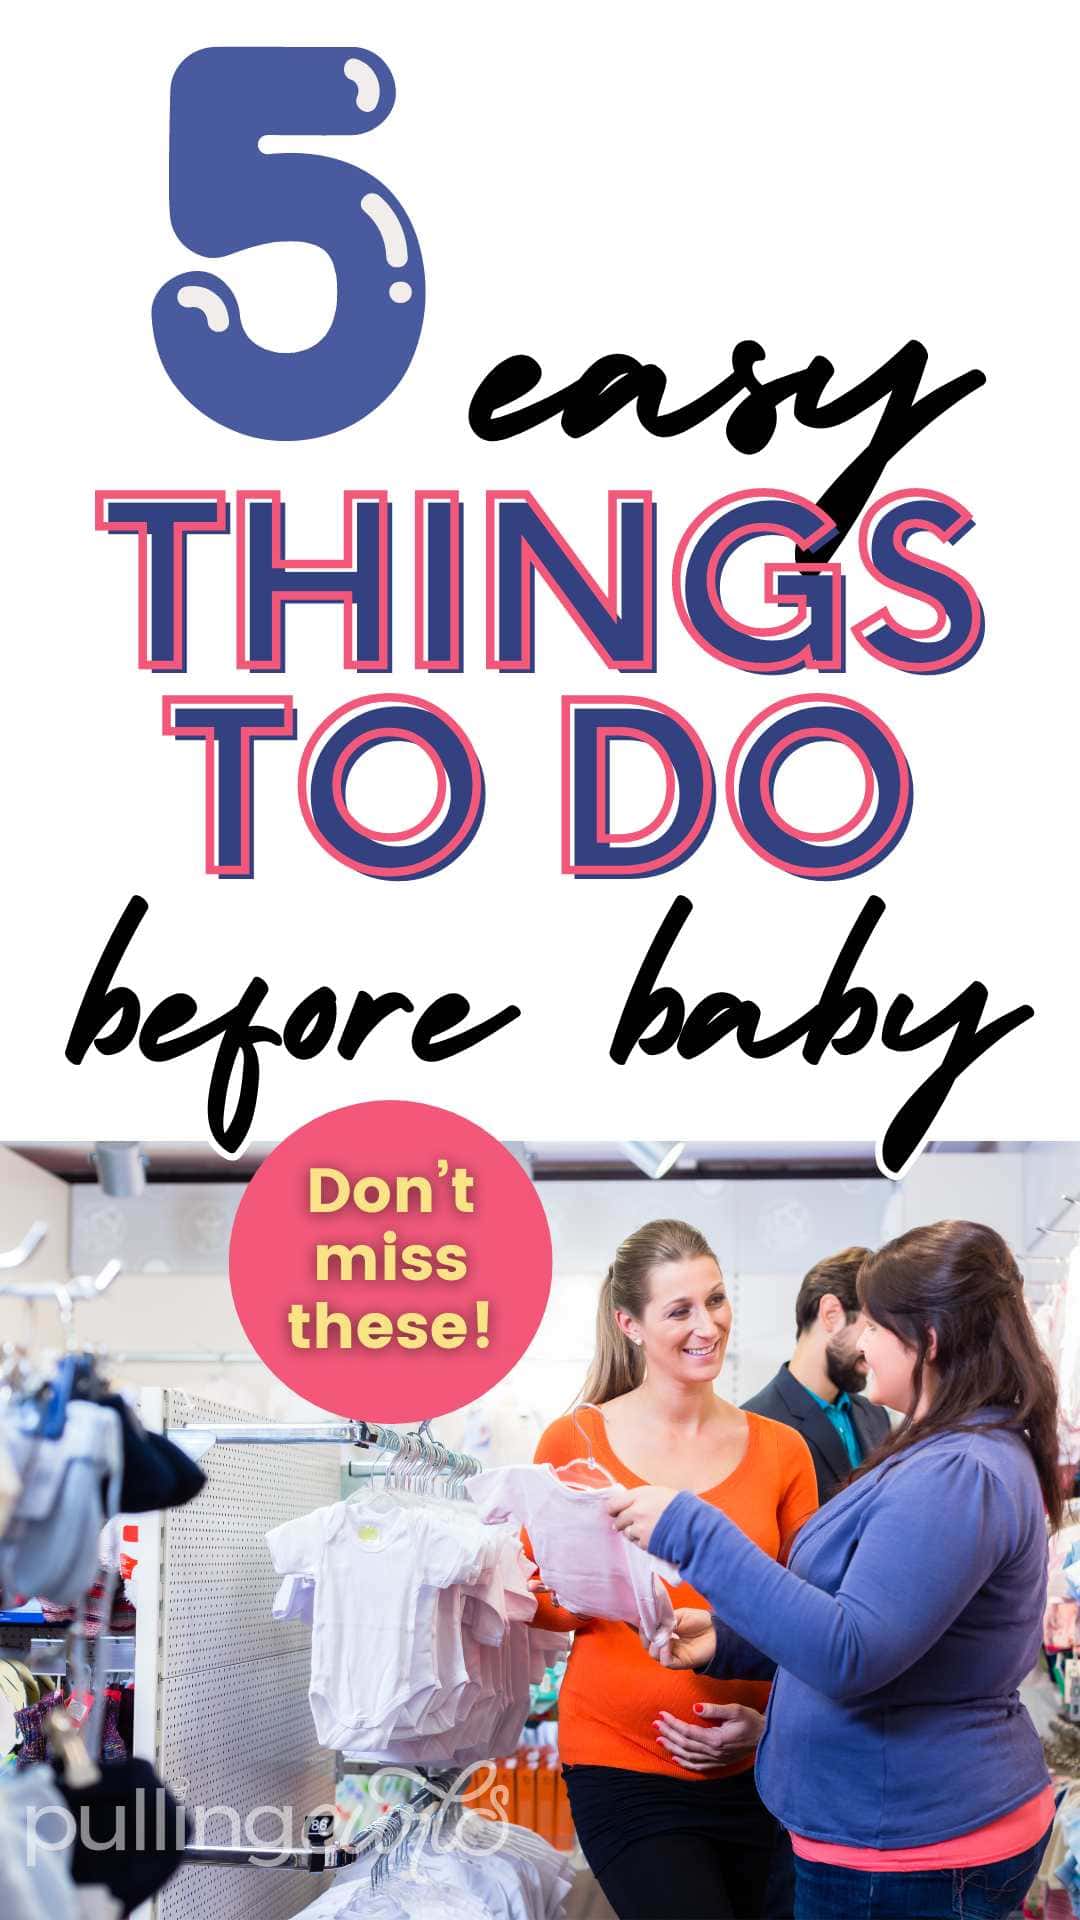 Get ready for your new baby with these 5 easy yet important tasks to complete before birth. Everything from insurance, birth plans, prenatal classes to car seats, we have you covered! via @pullingcurls